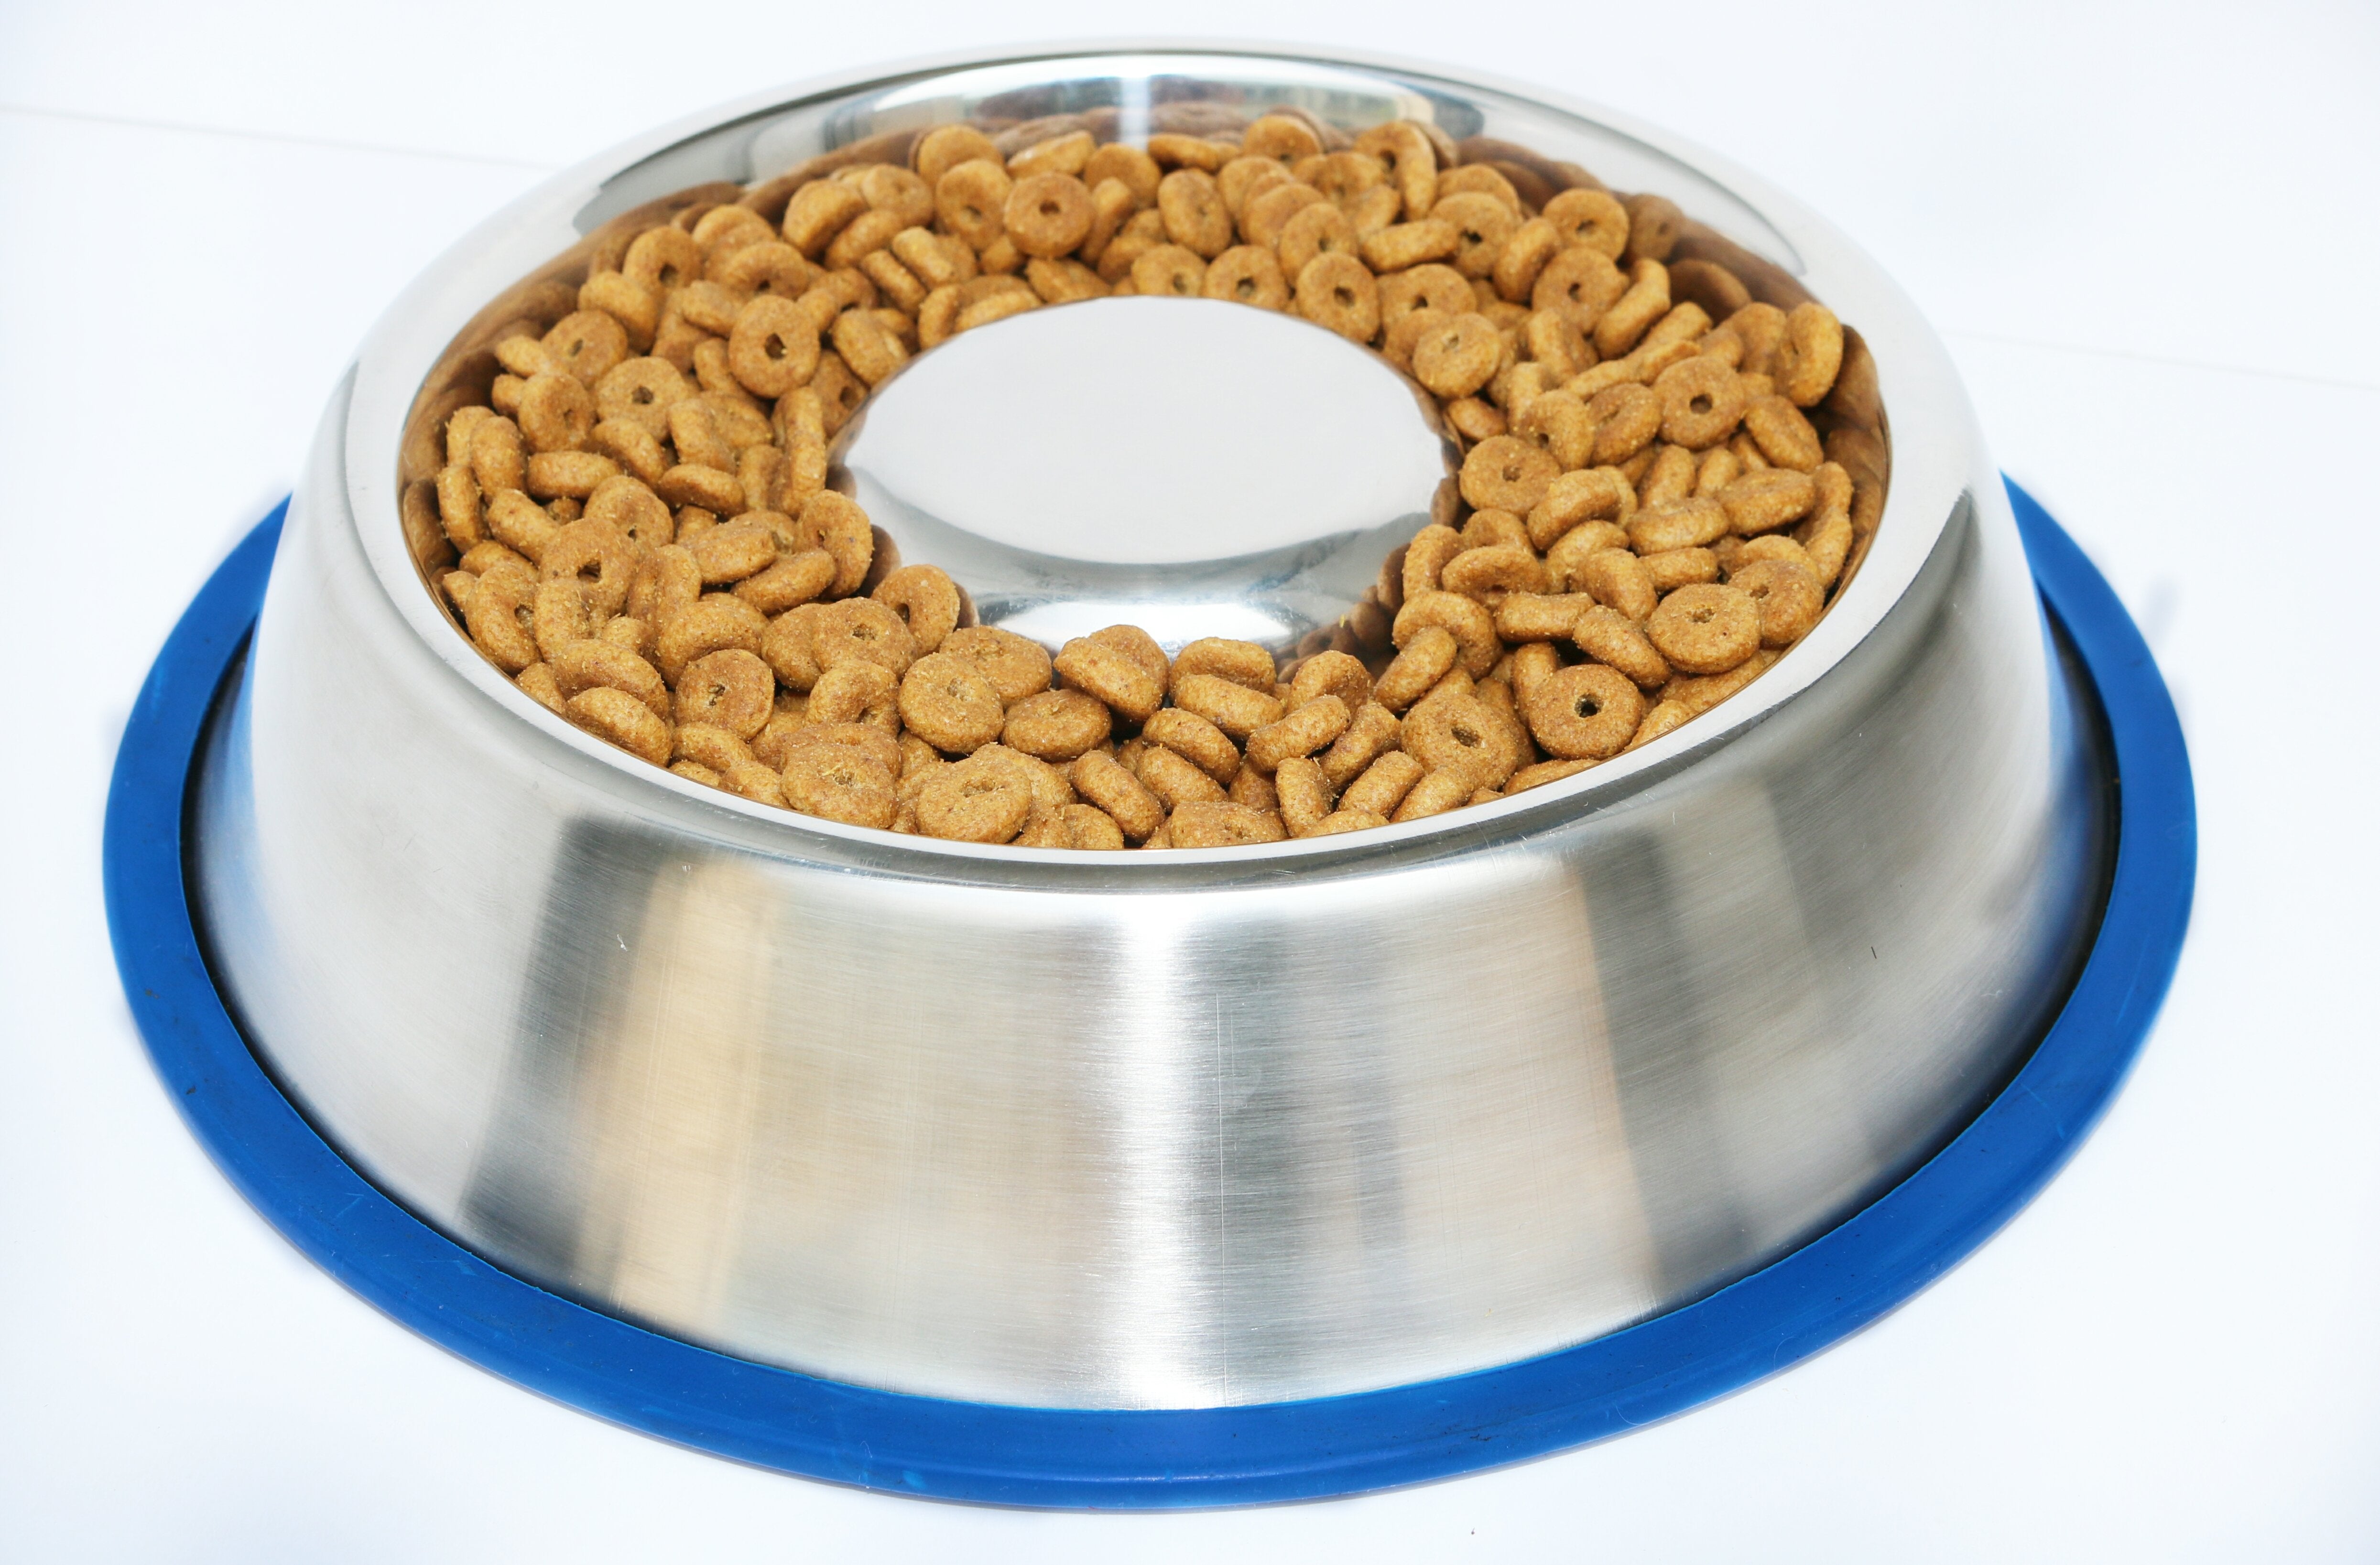 Stainless Steel Slow Feed Dog Bowl - 4 Cup Extra Large Pet Slow Feeder, 2  Standard Metal Bowls Fit Elevated Feeders, Eating Bowl, Stops Dog Food  Gulping, Dog Food and Water Bowl